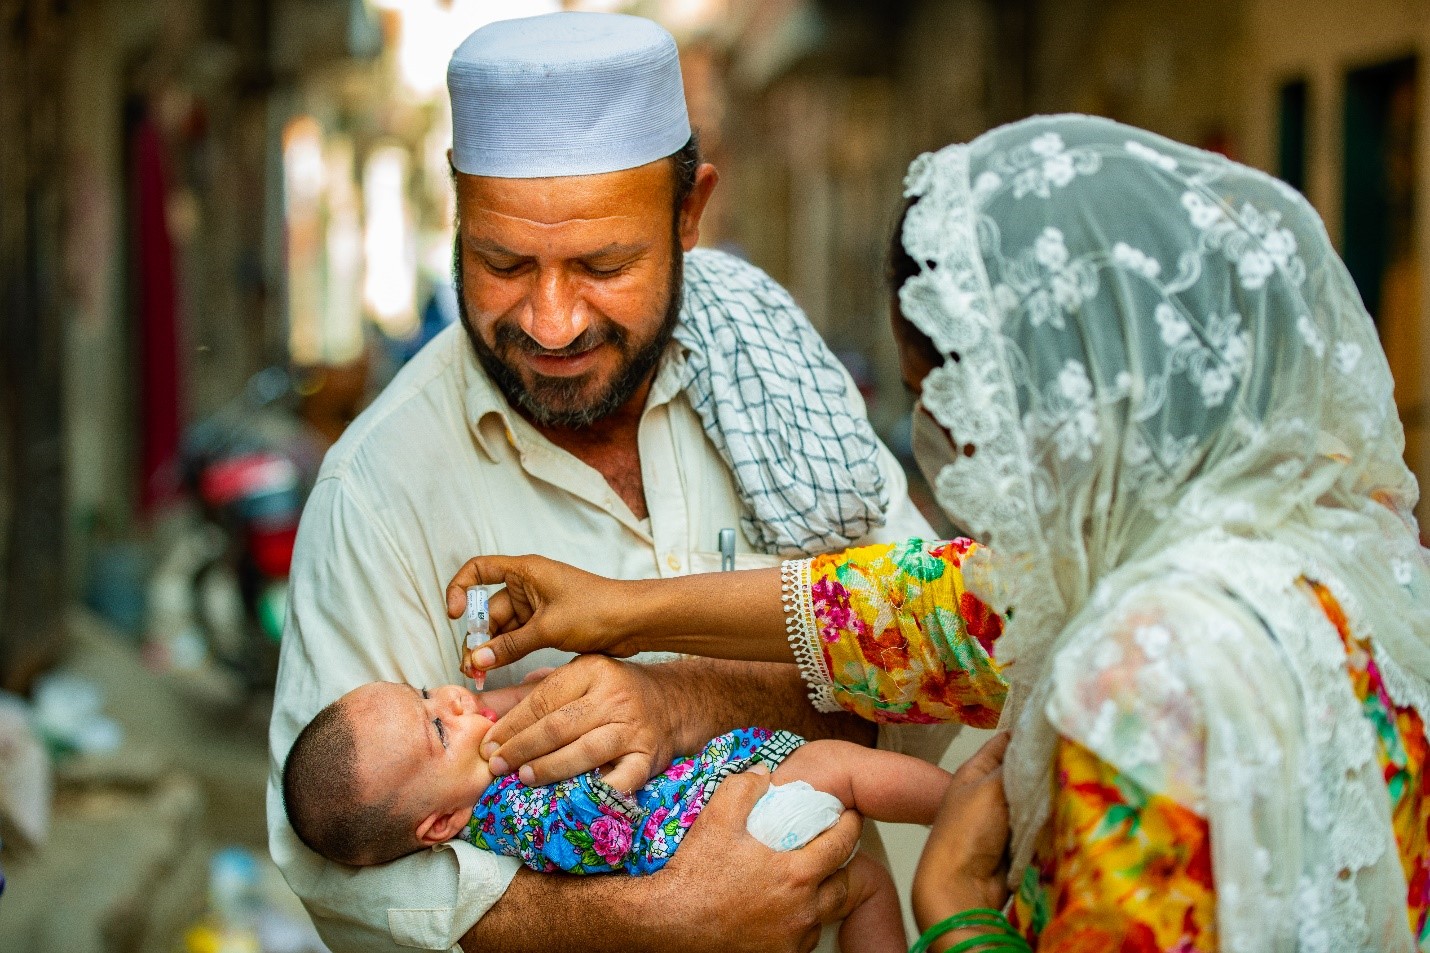 Polio staff Husna Bibi (24) is vaccinating a four-month old girl on the lap of his father in UC-117, Maraghzar Colony, Lahore, Pakistan during case response in August. Photo: 2020/UNICEF Pakistan/Mehdi Bukhari